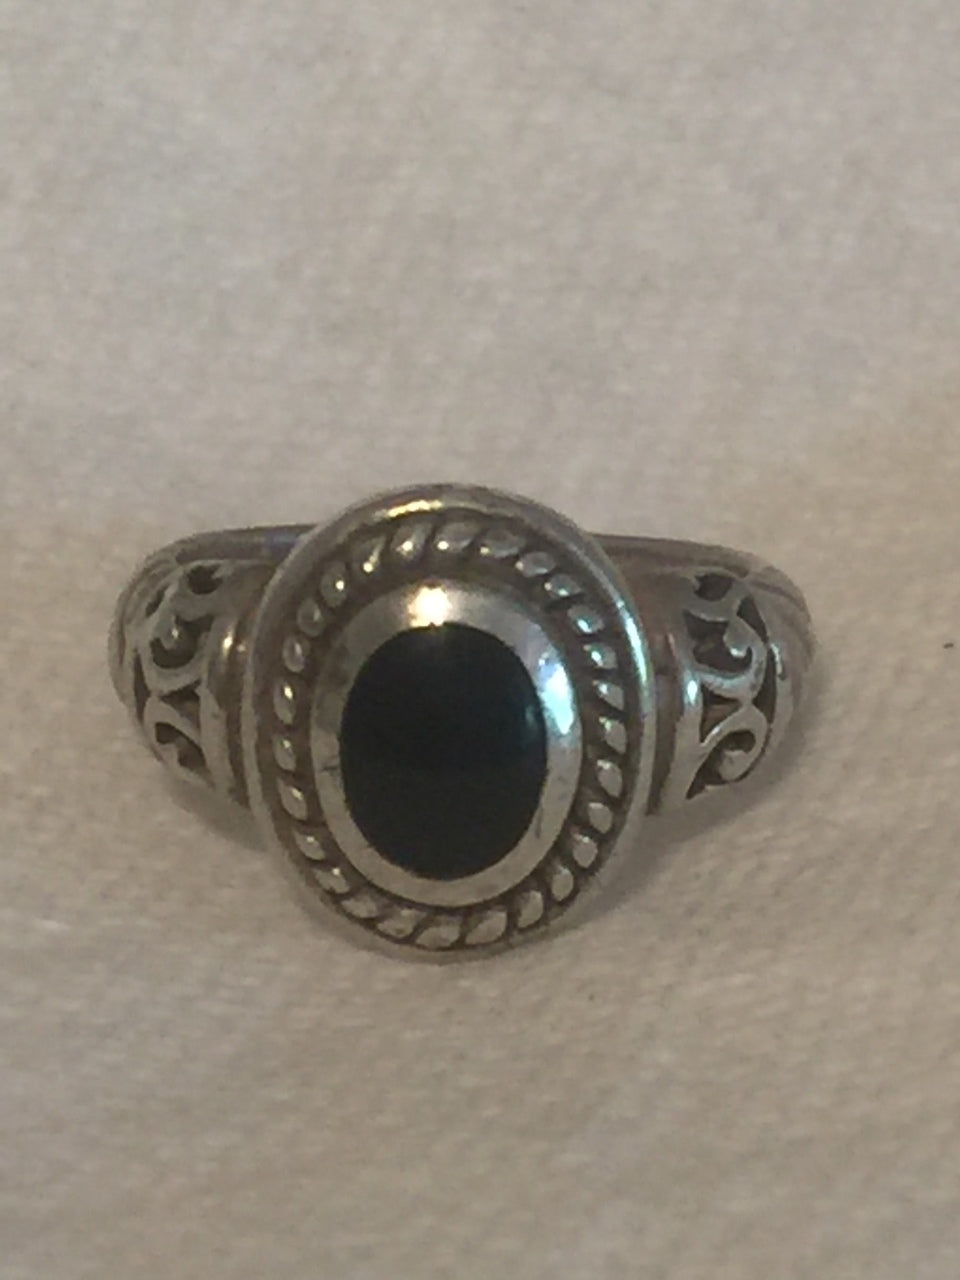 Onyx Ring Vintage Sterling Silver  Size 7.5  6.4g